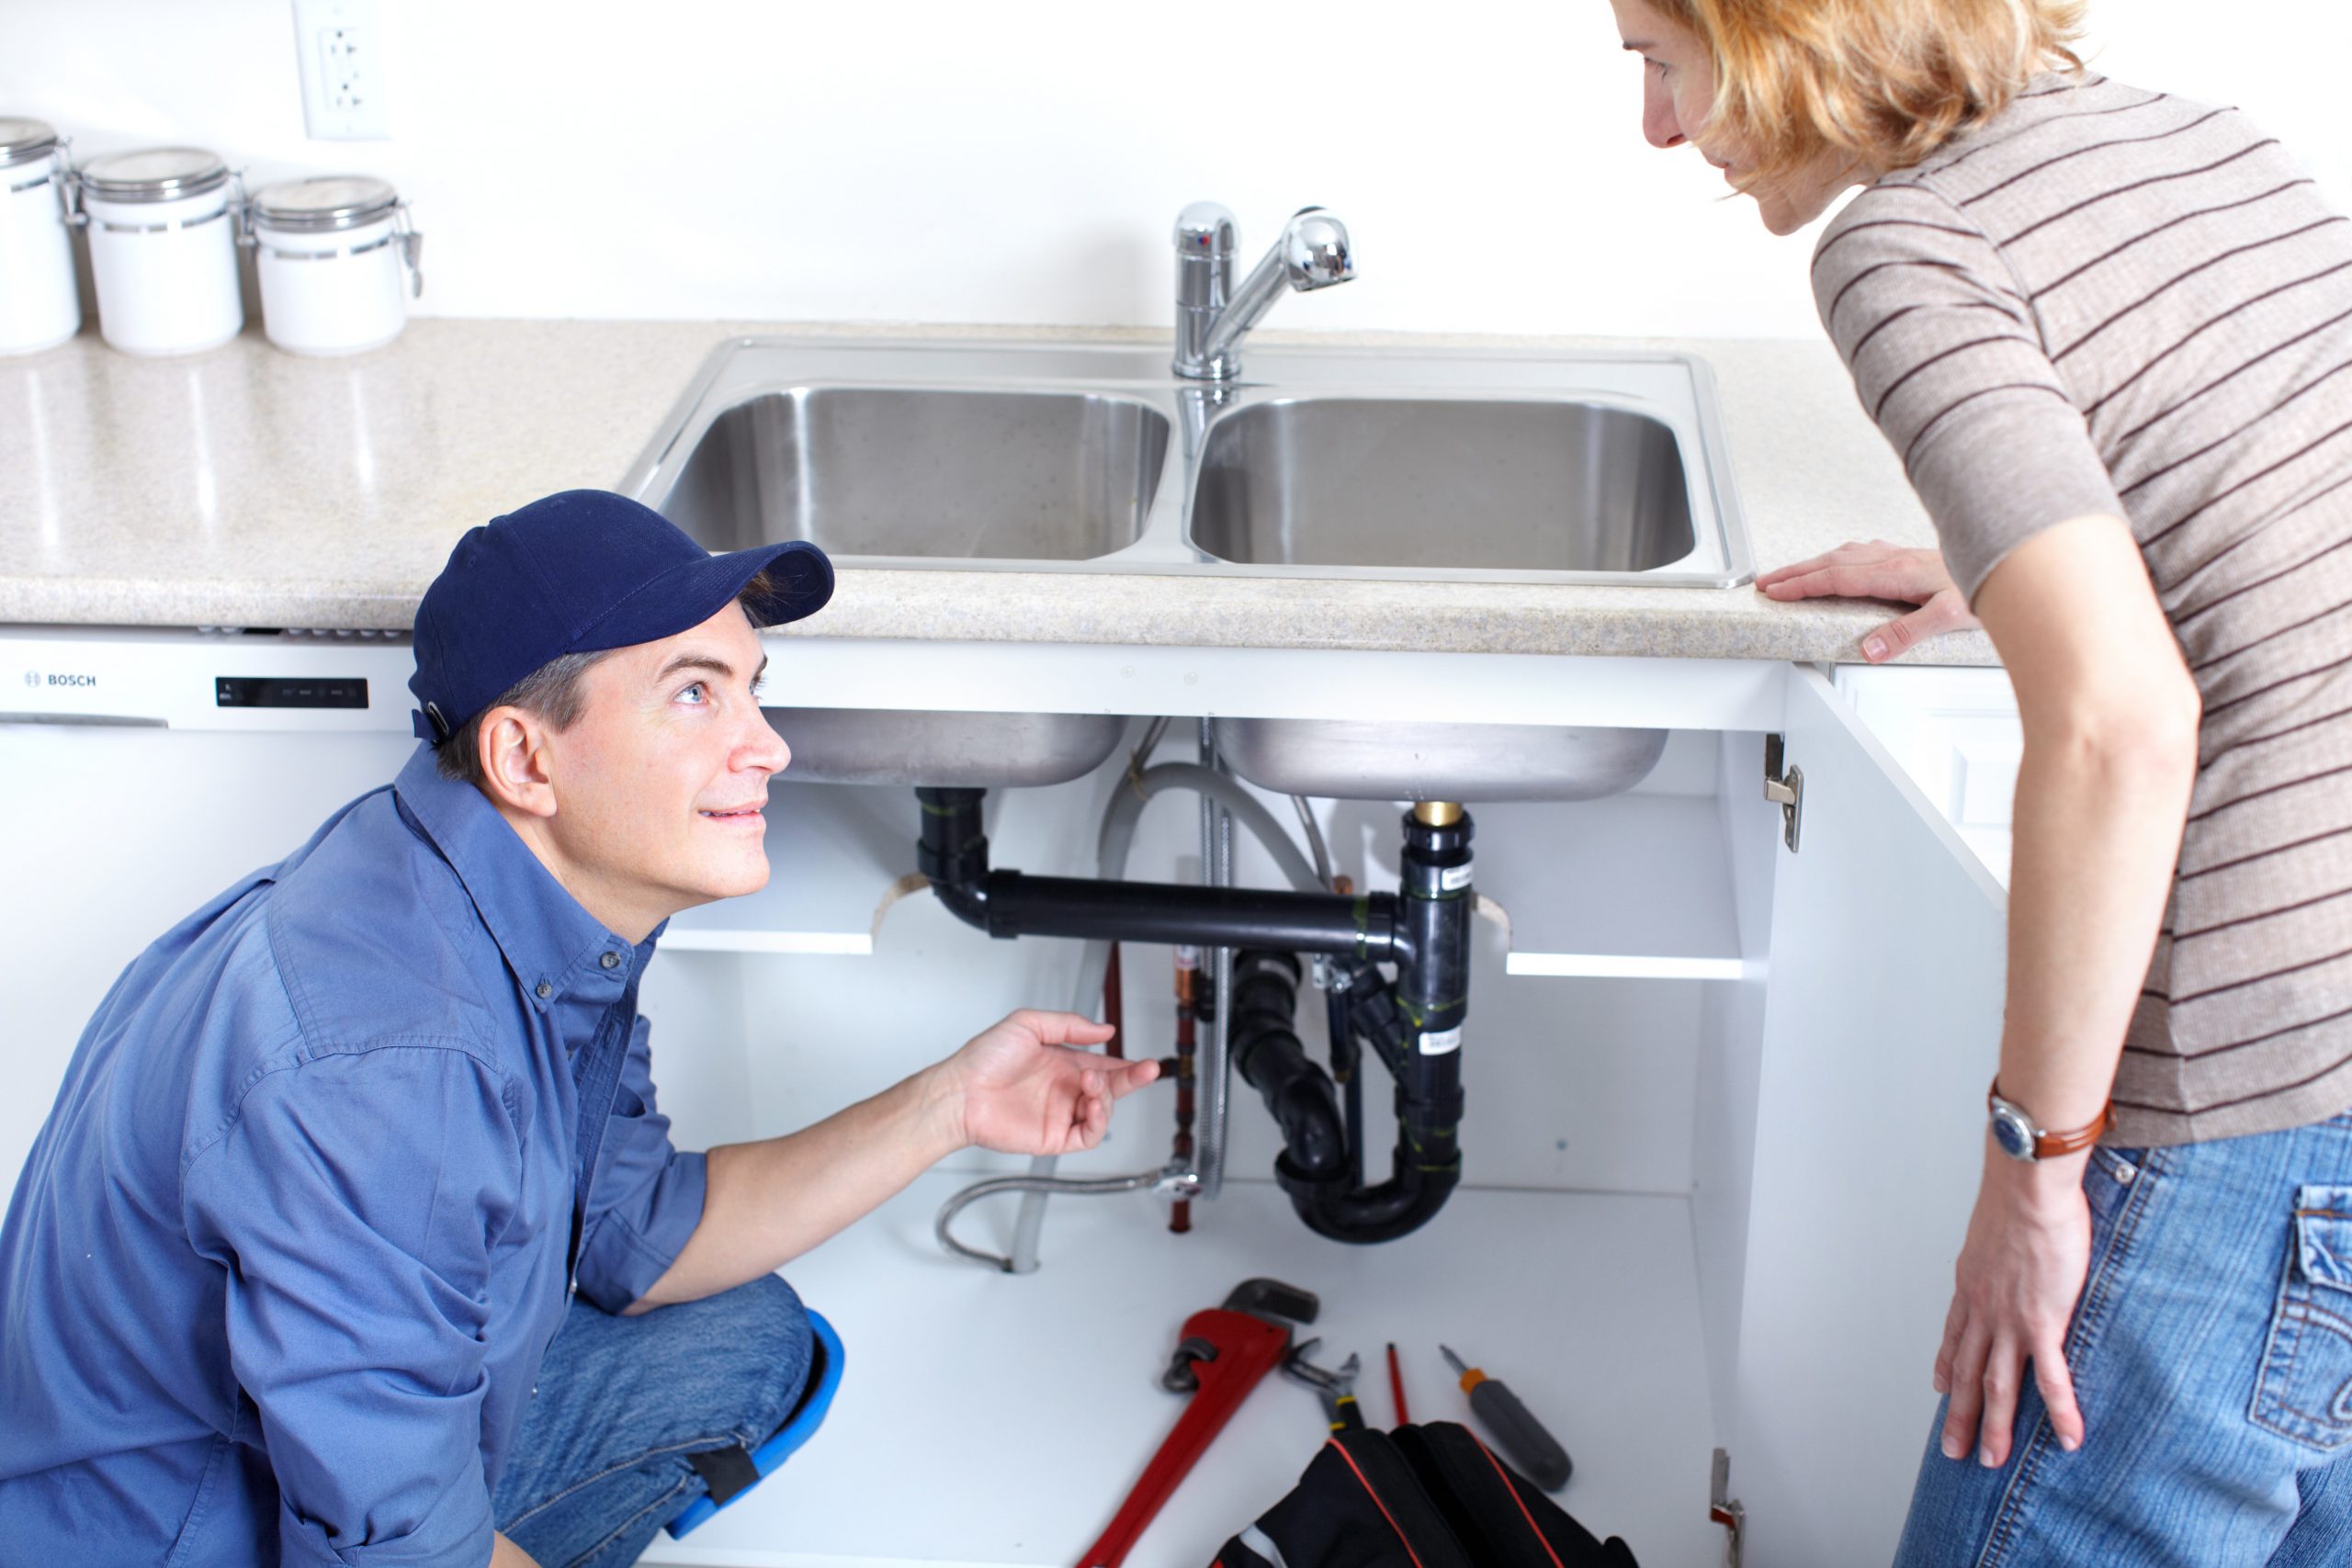 Companies That Provide Expert Plumbing Repair Service Make Sure Your Home Functions Right at All Times